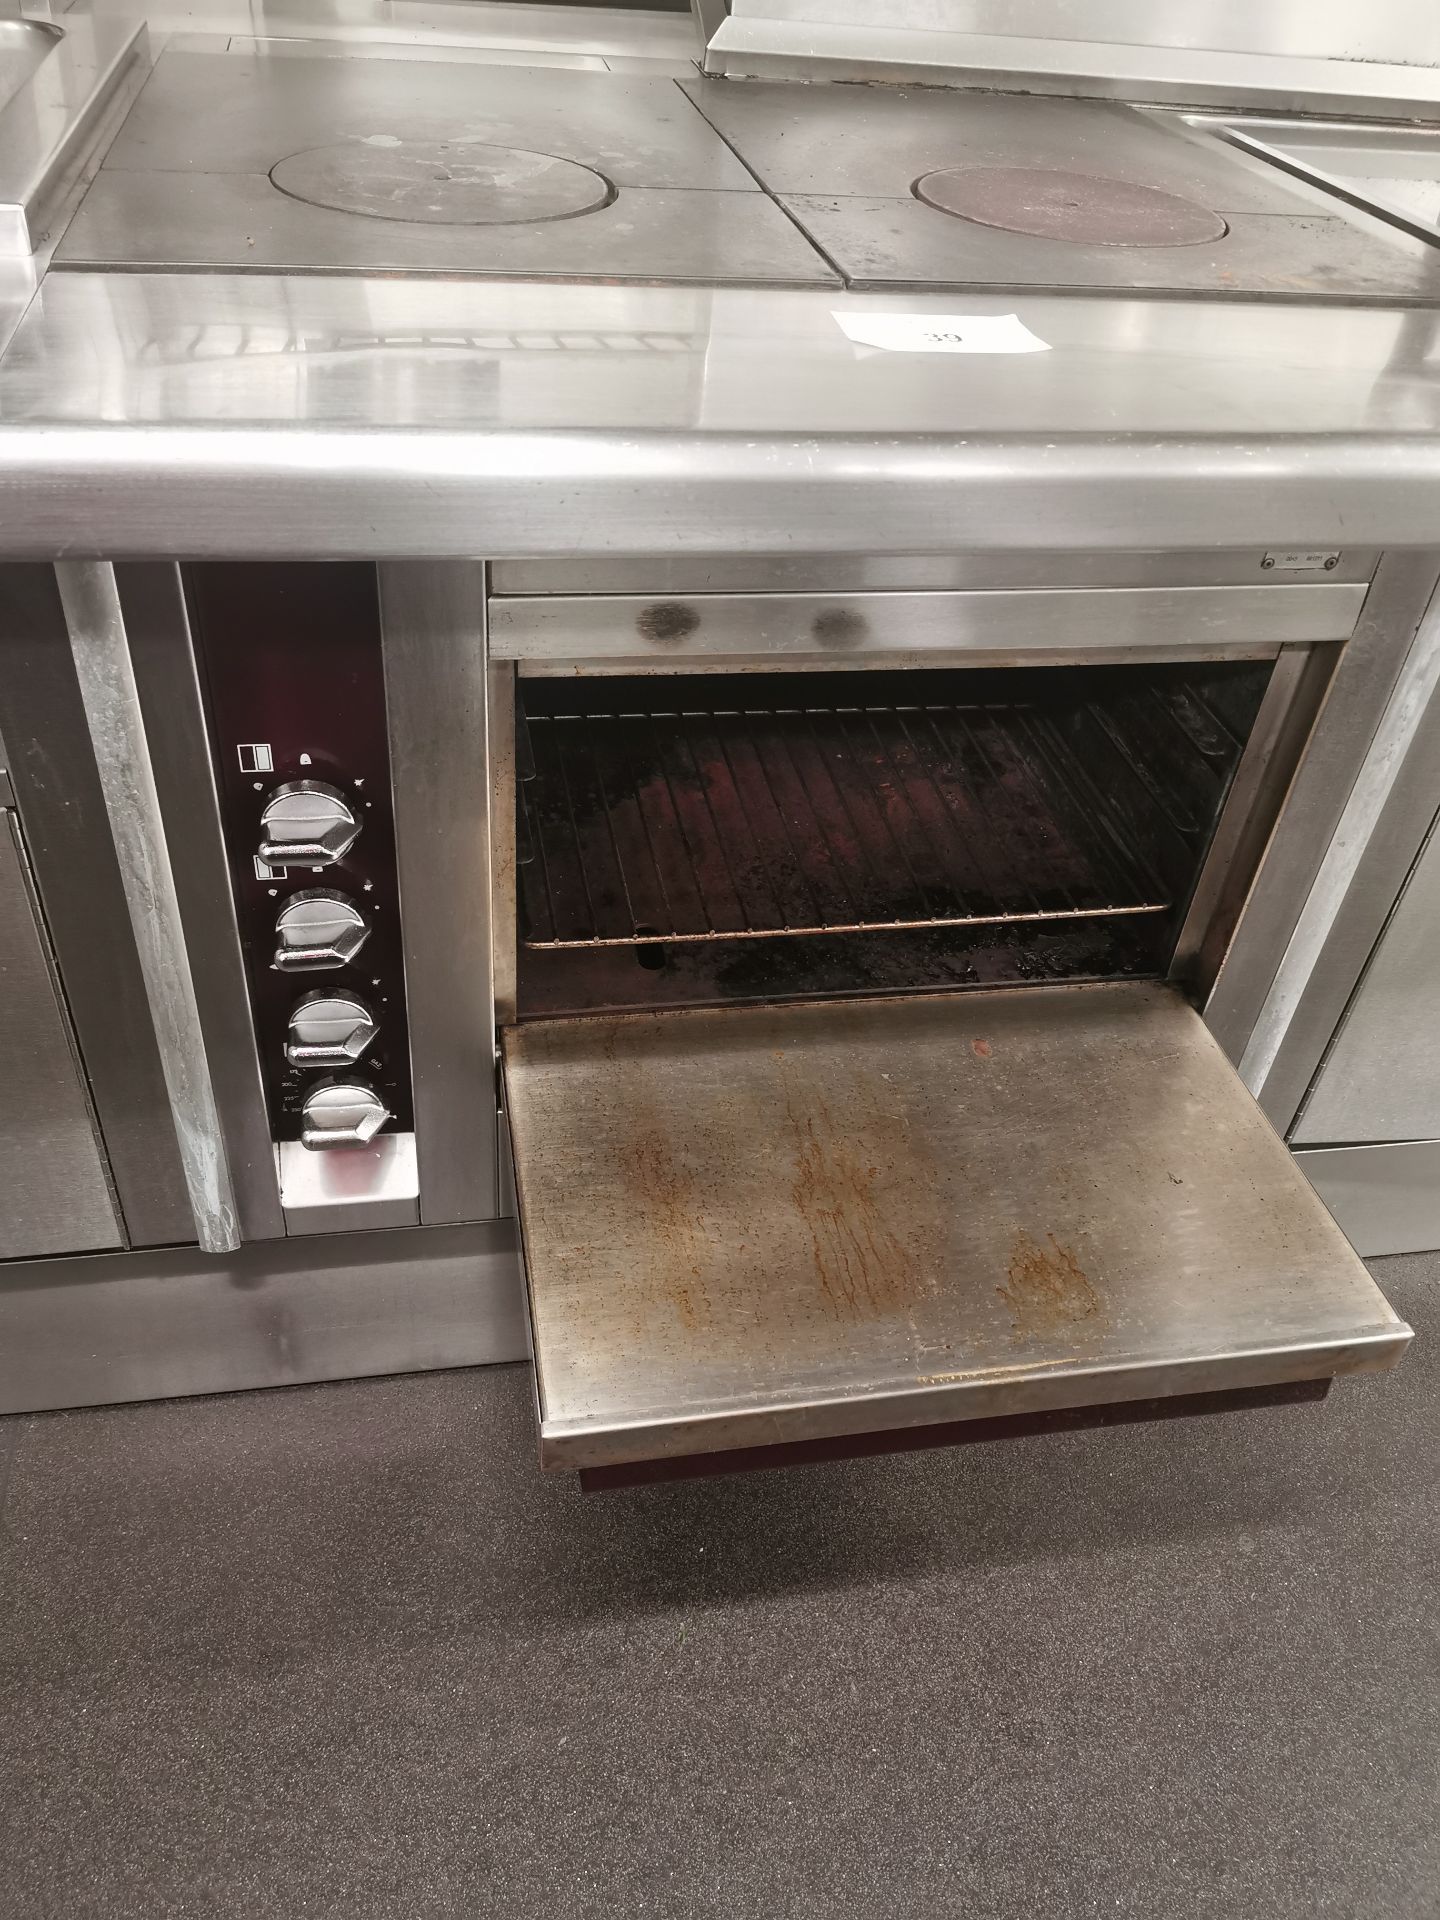 Charvet pro series twin hot plates and oven W85cm - Image 3 of 4